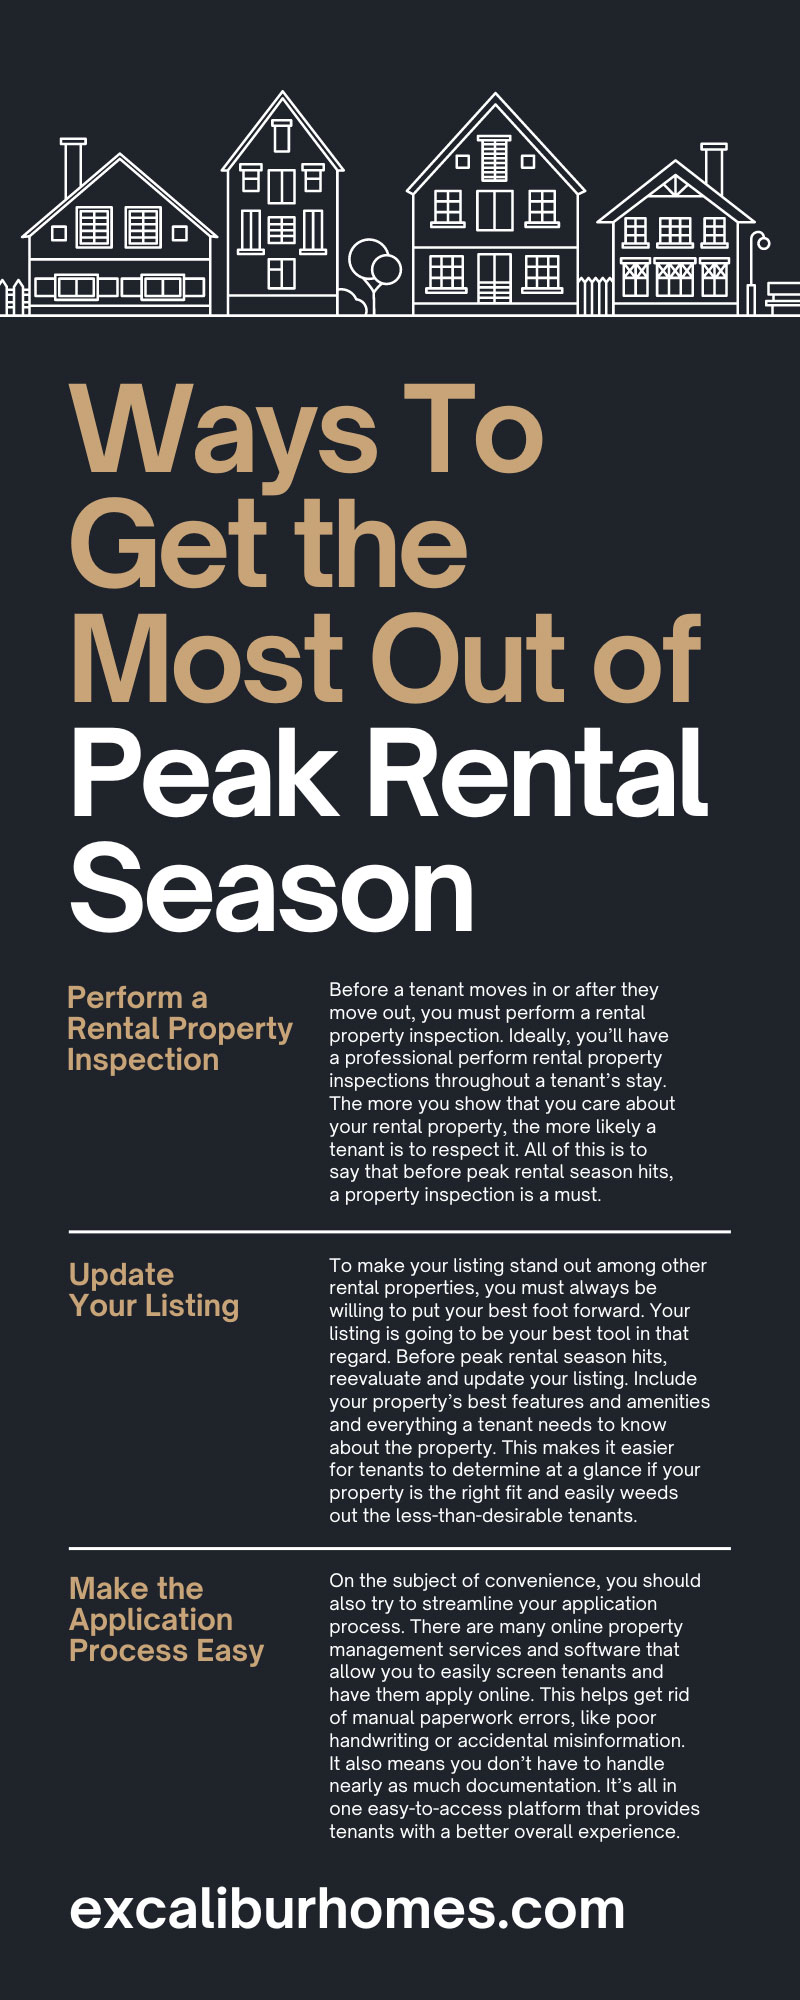 10 Ways To Get the Most Out of Peak Rental Season